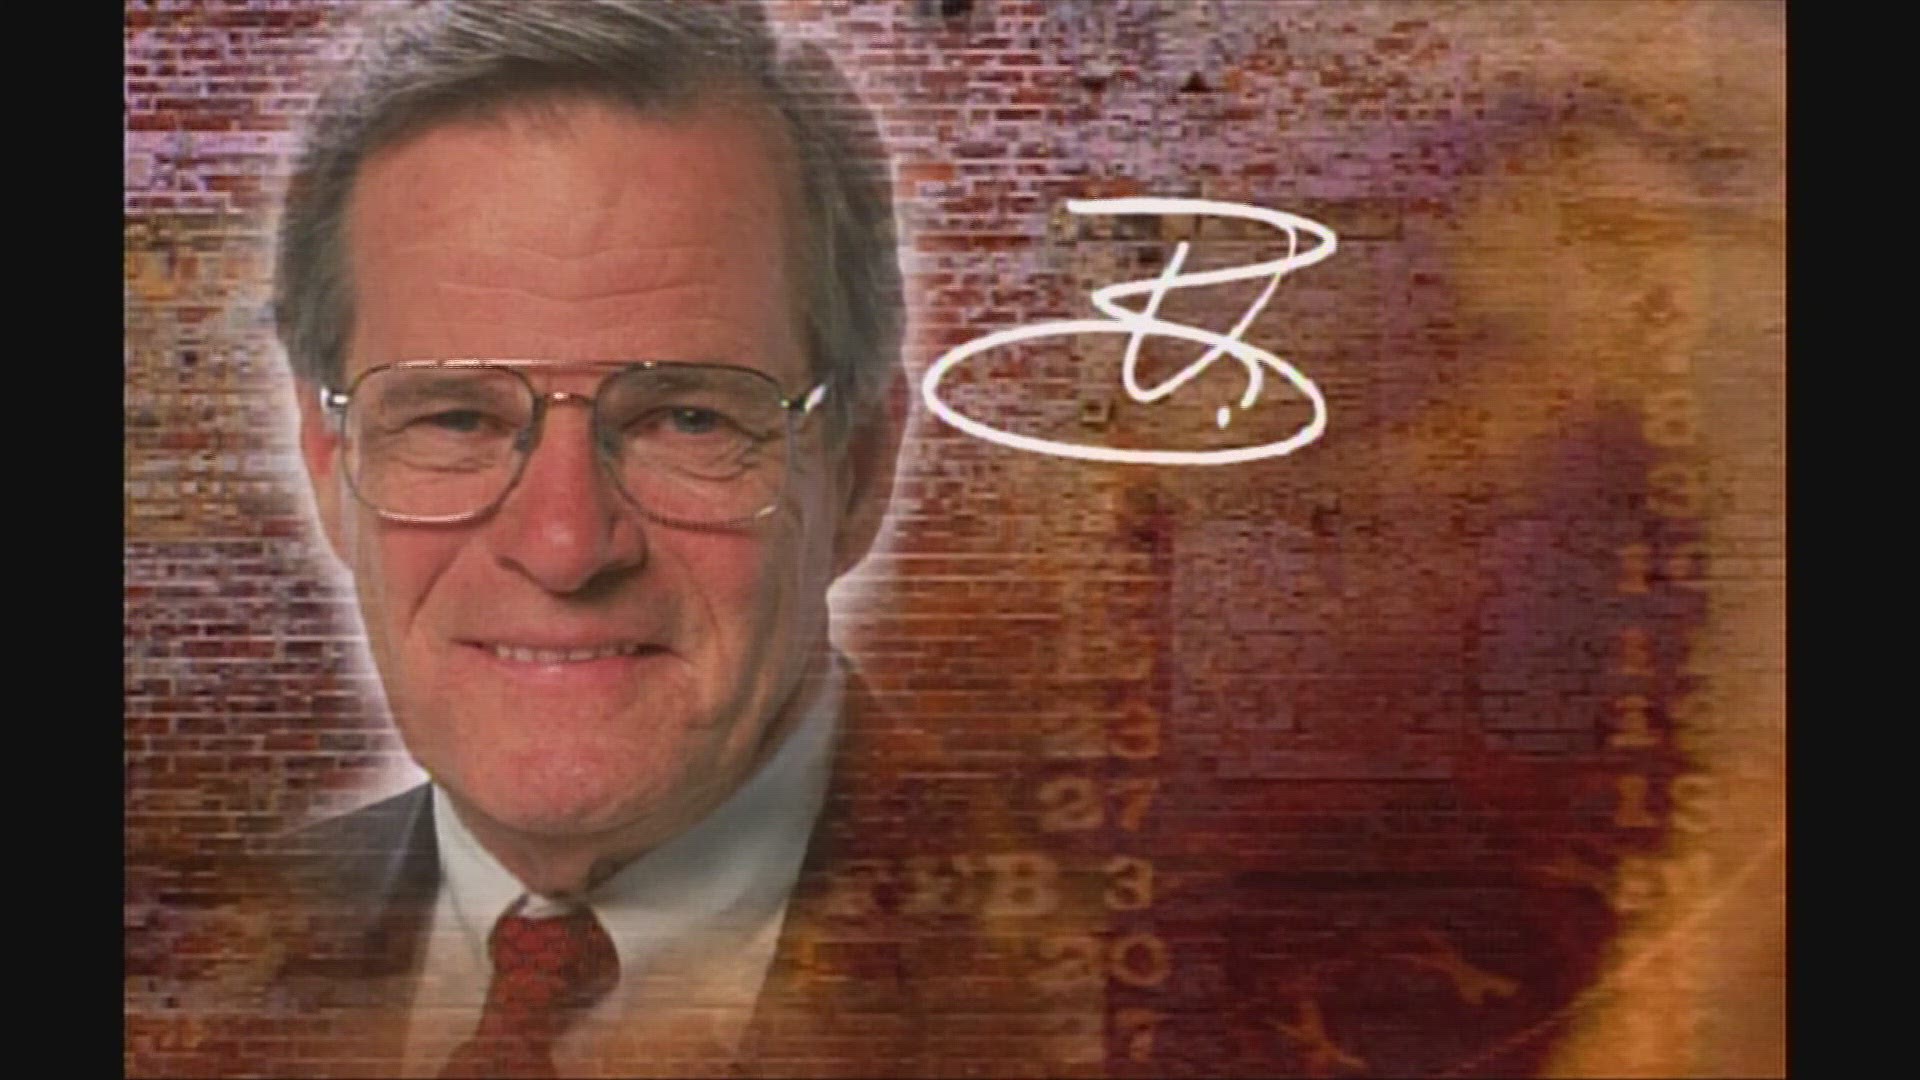 In 2000, Bill Williams retired from his on-air duties at WBIR. To commemorate his time as an anchor, WBIR produced an hour-long look back at his career in Knoxville.